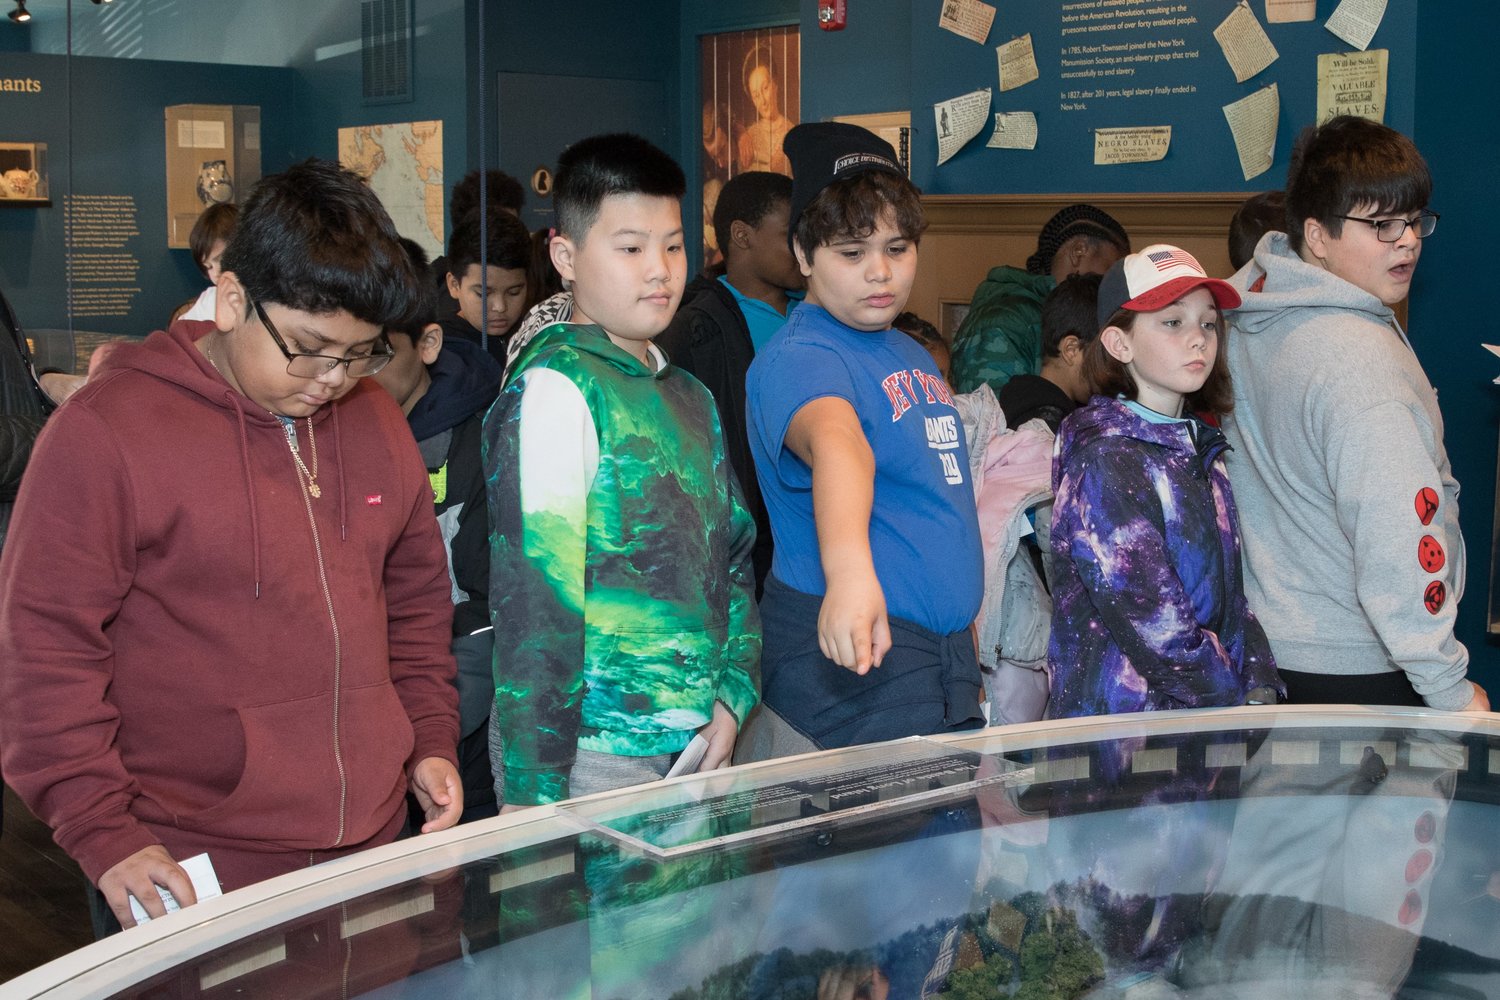 Students from the Maplewood Elementary School, in Huntington Station, visited the Raynham Hall Museum Education Center in December, and saw dioramas depicting Oyster Bay in 1780. The fourth-grade classes from the Oyster Bay-East Norwich School District will take a trip there in April.